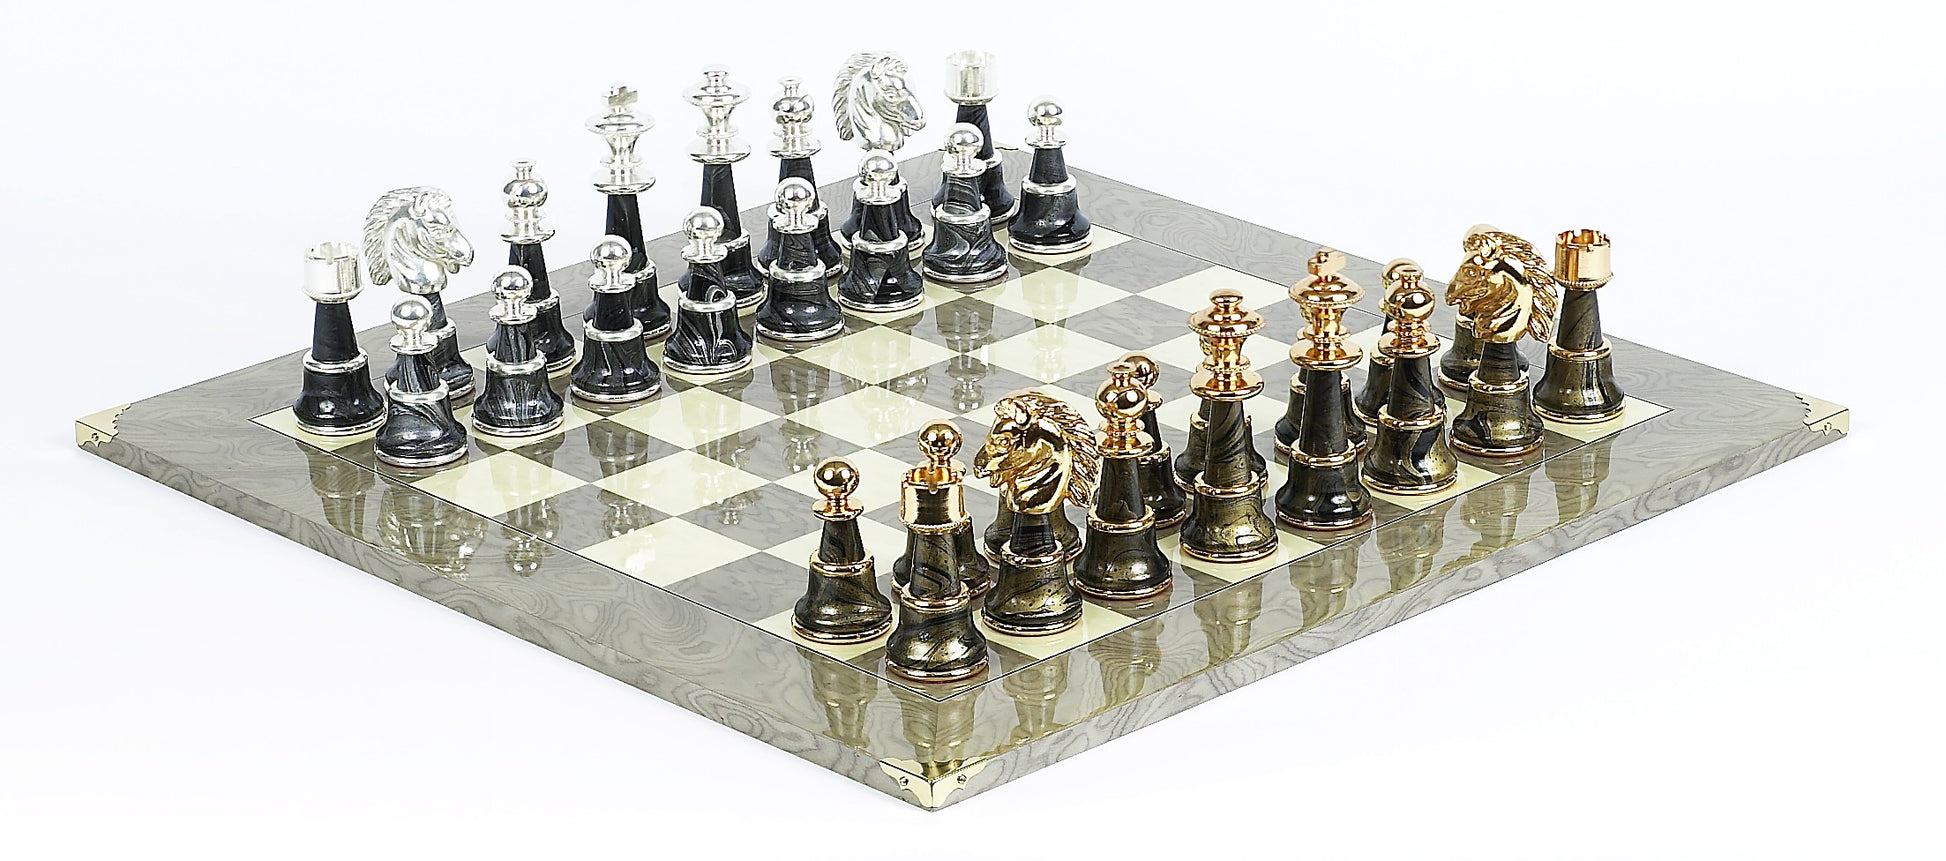 Magnificent Gold/Silver plated Chessmen & 24 inch Superior Board Chess Set